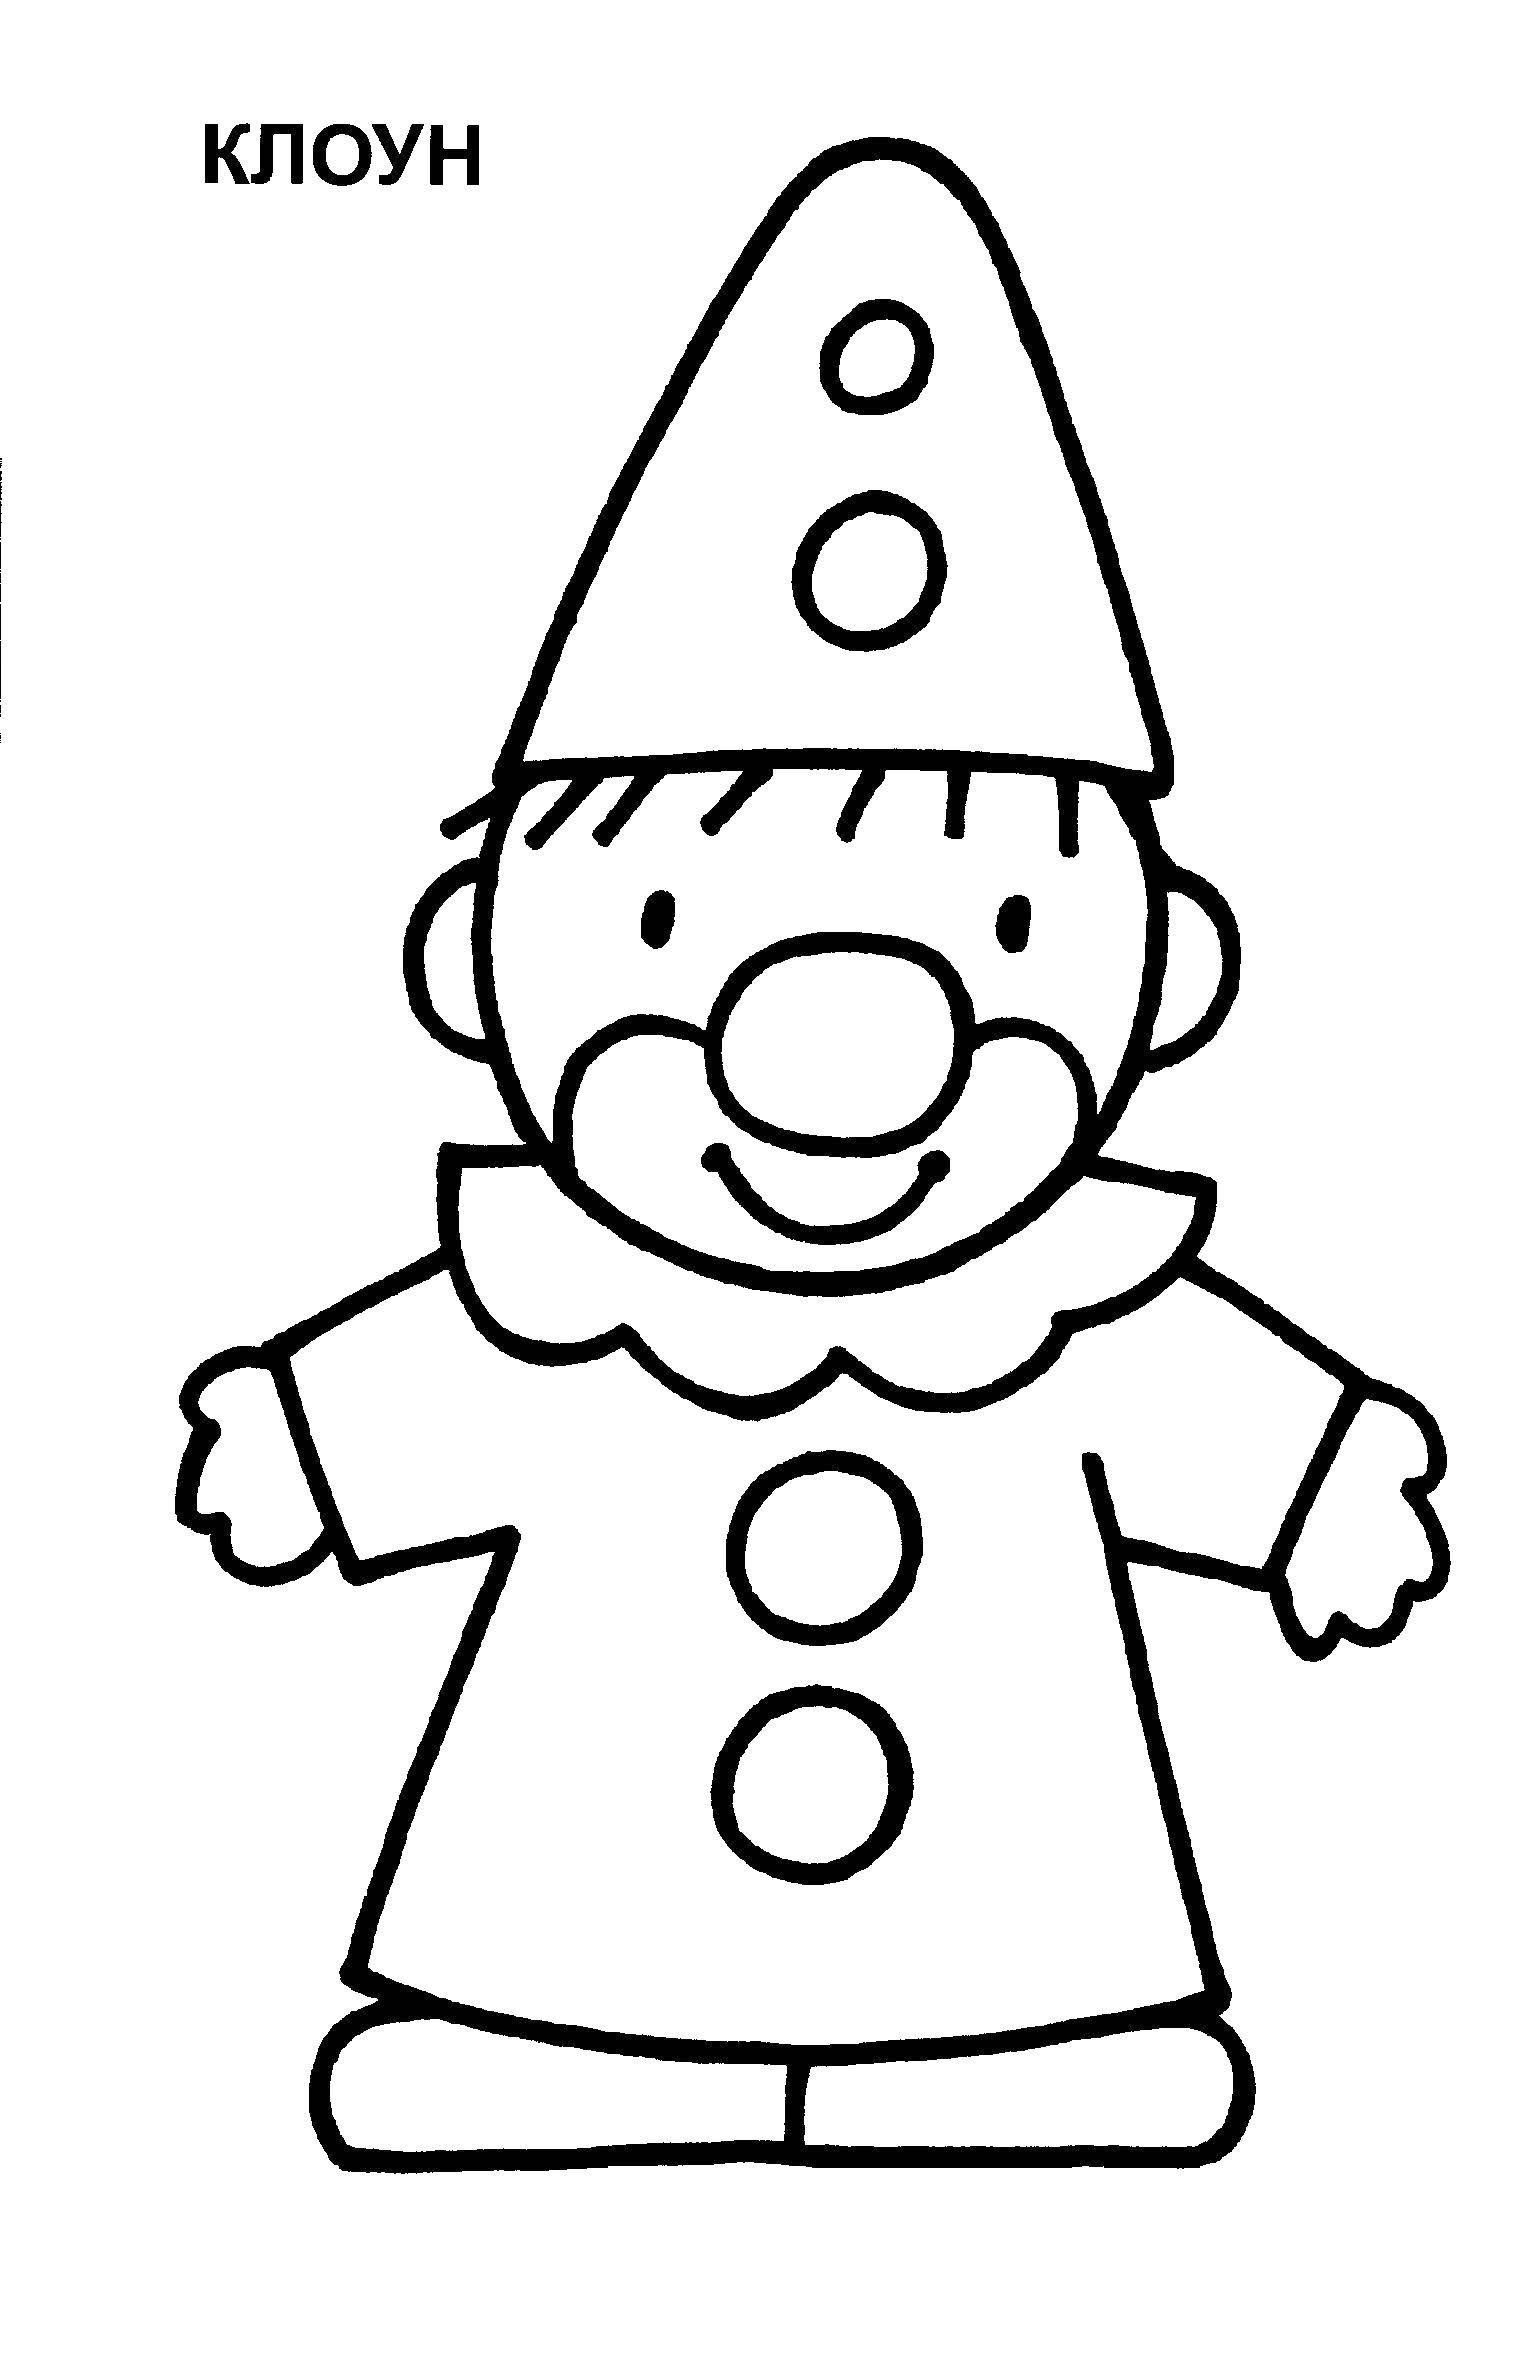 Coloring Clown. Category Coloring pages for kids. Tags:  Clown.